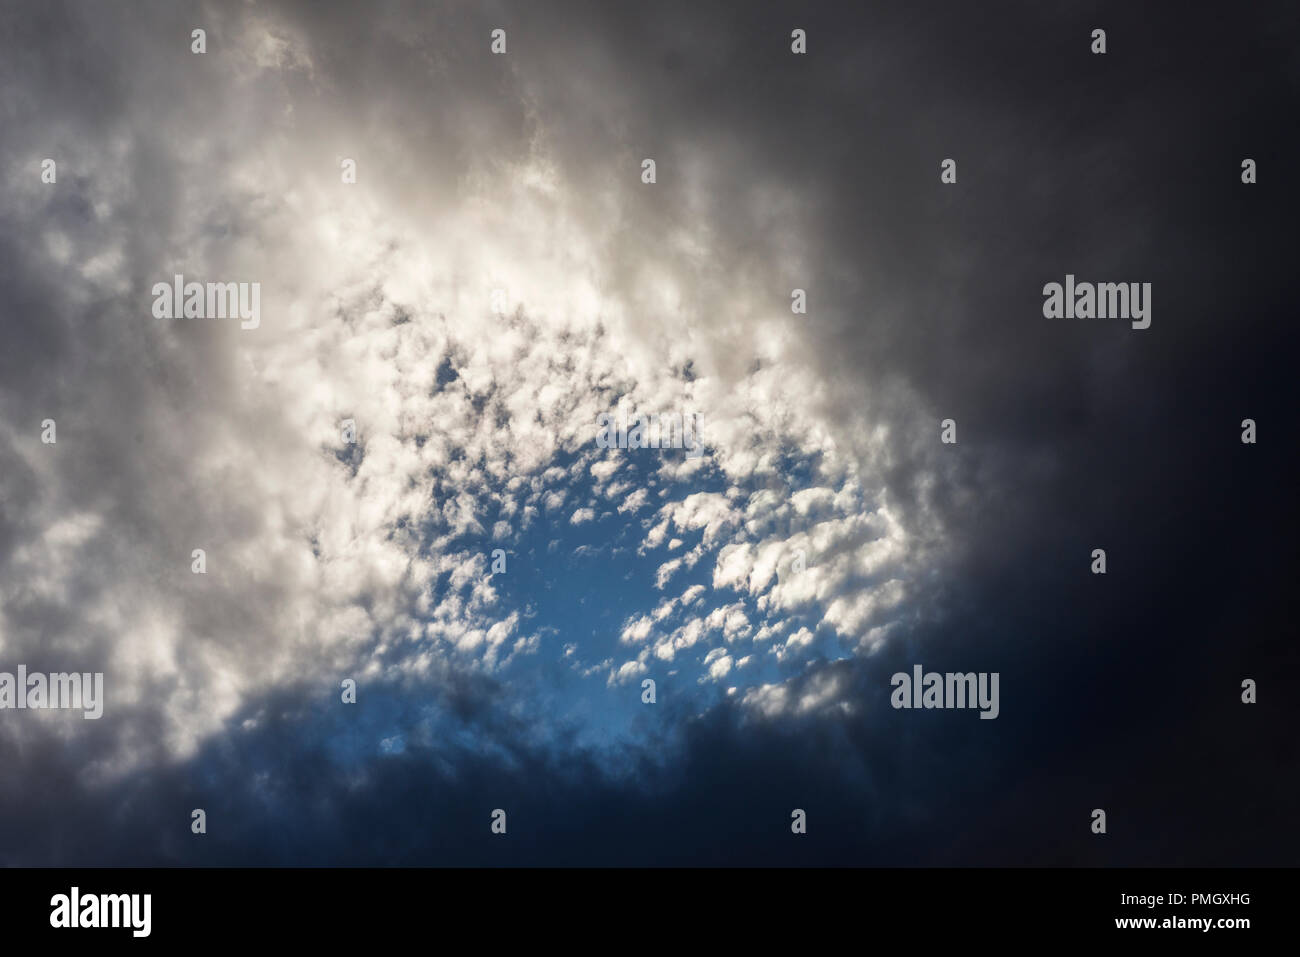 hole between the clouds that shows a part of the sky Stock Photo